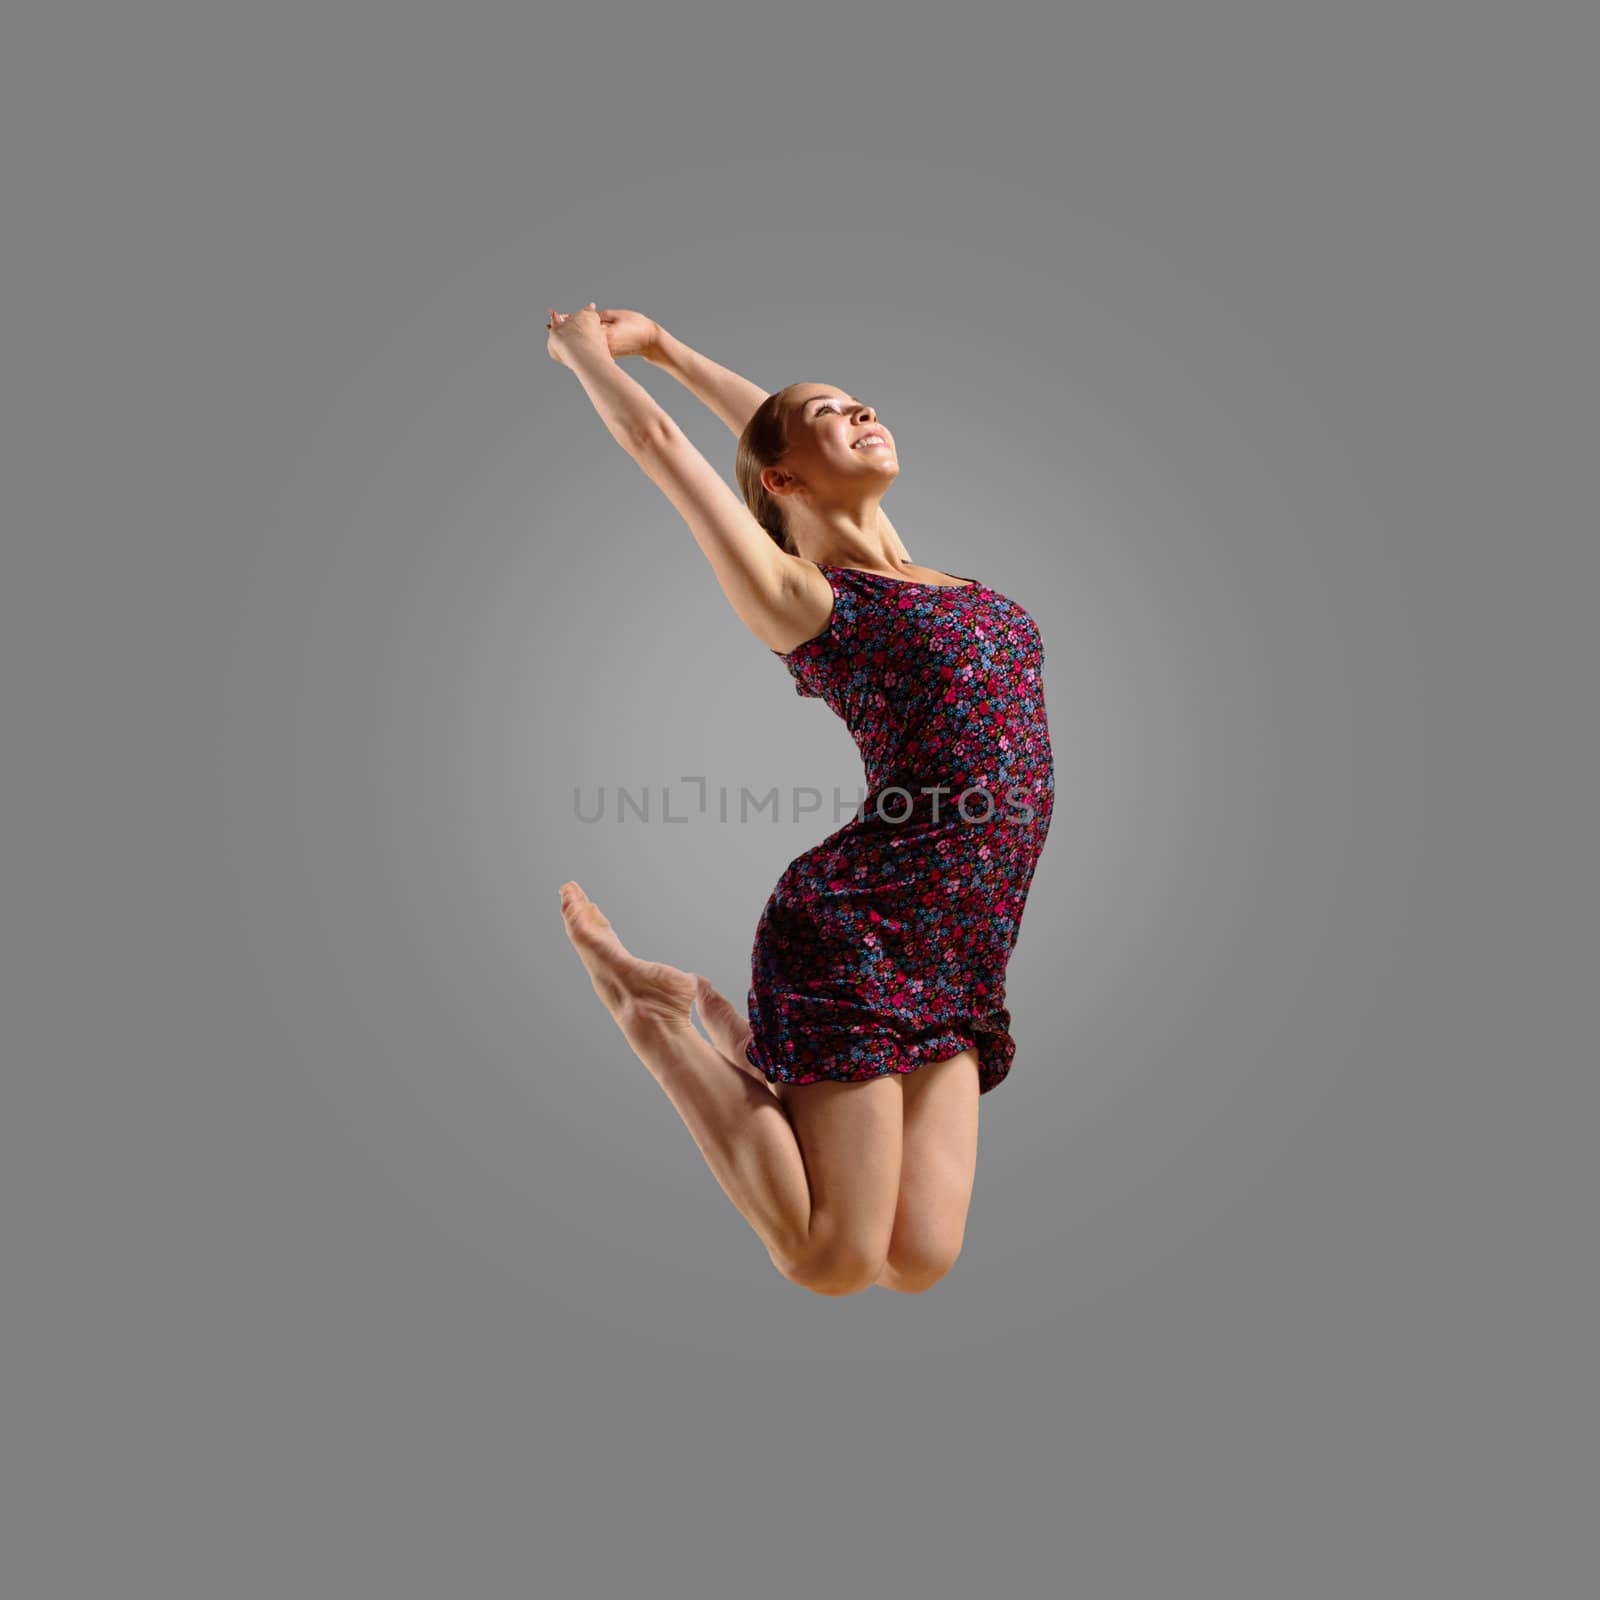 dancer jumping on a gray background, having a fun